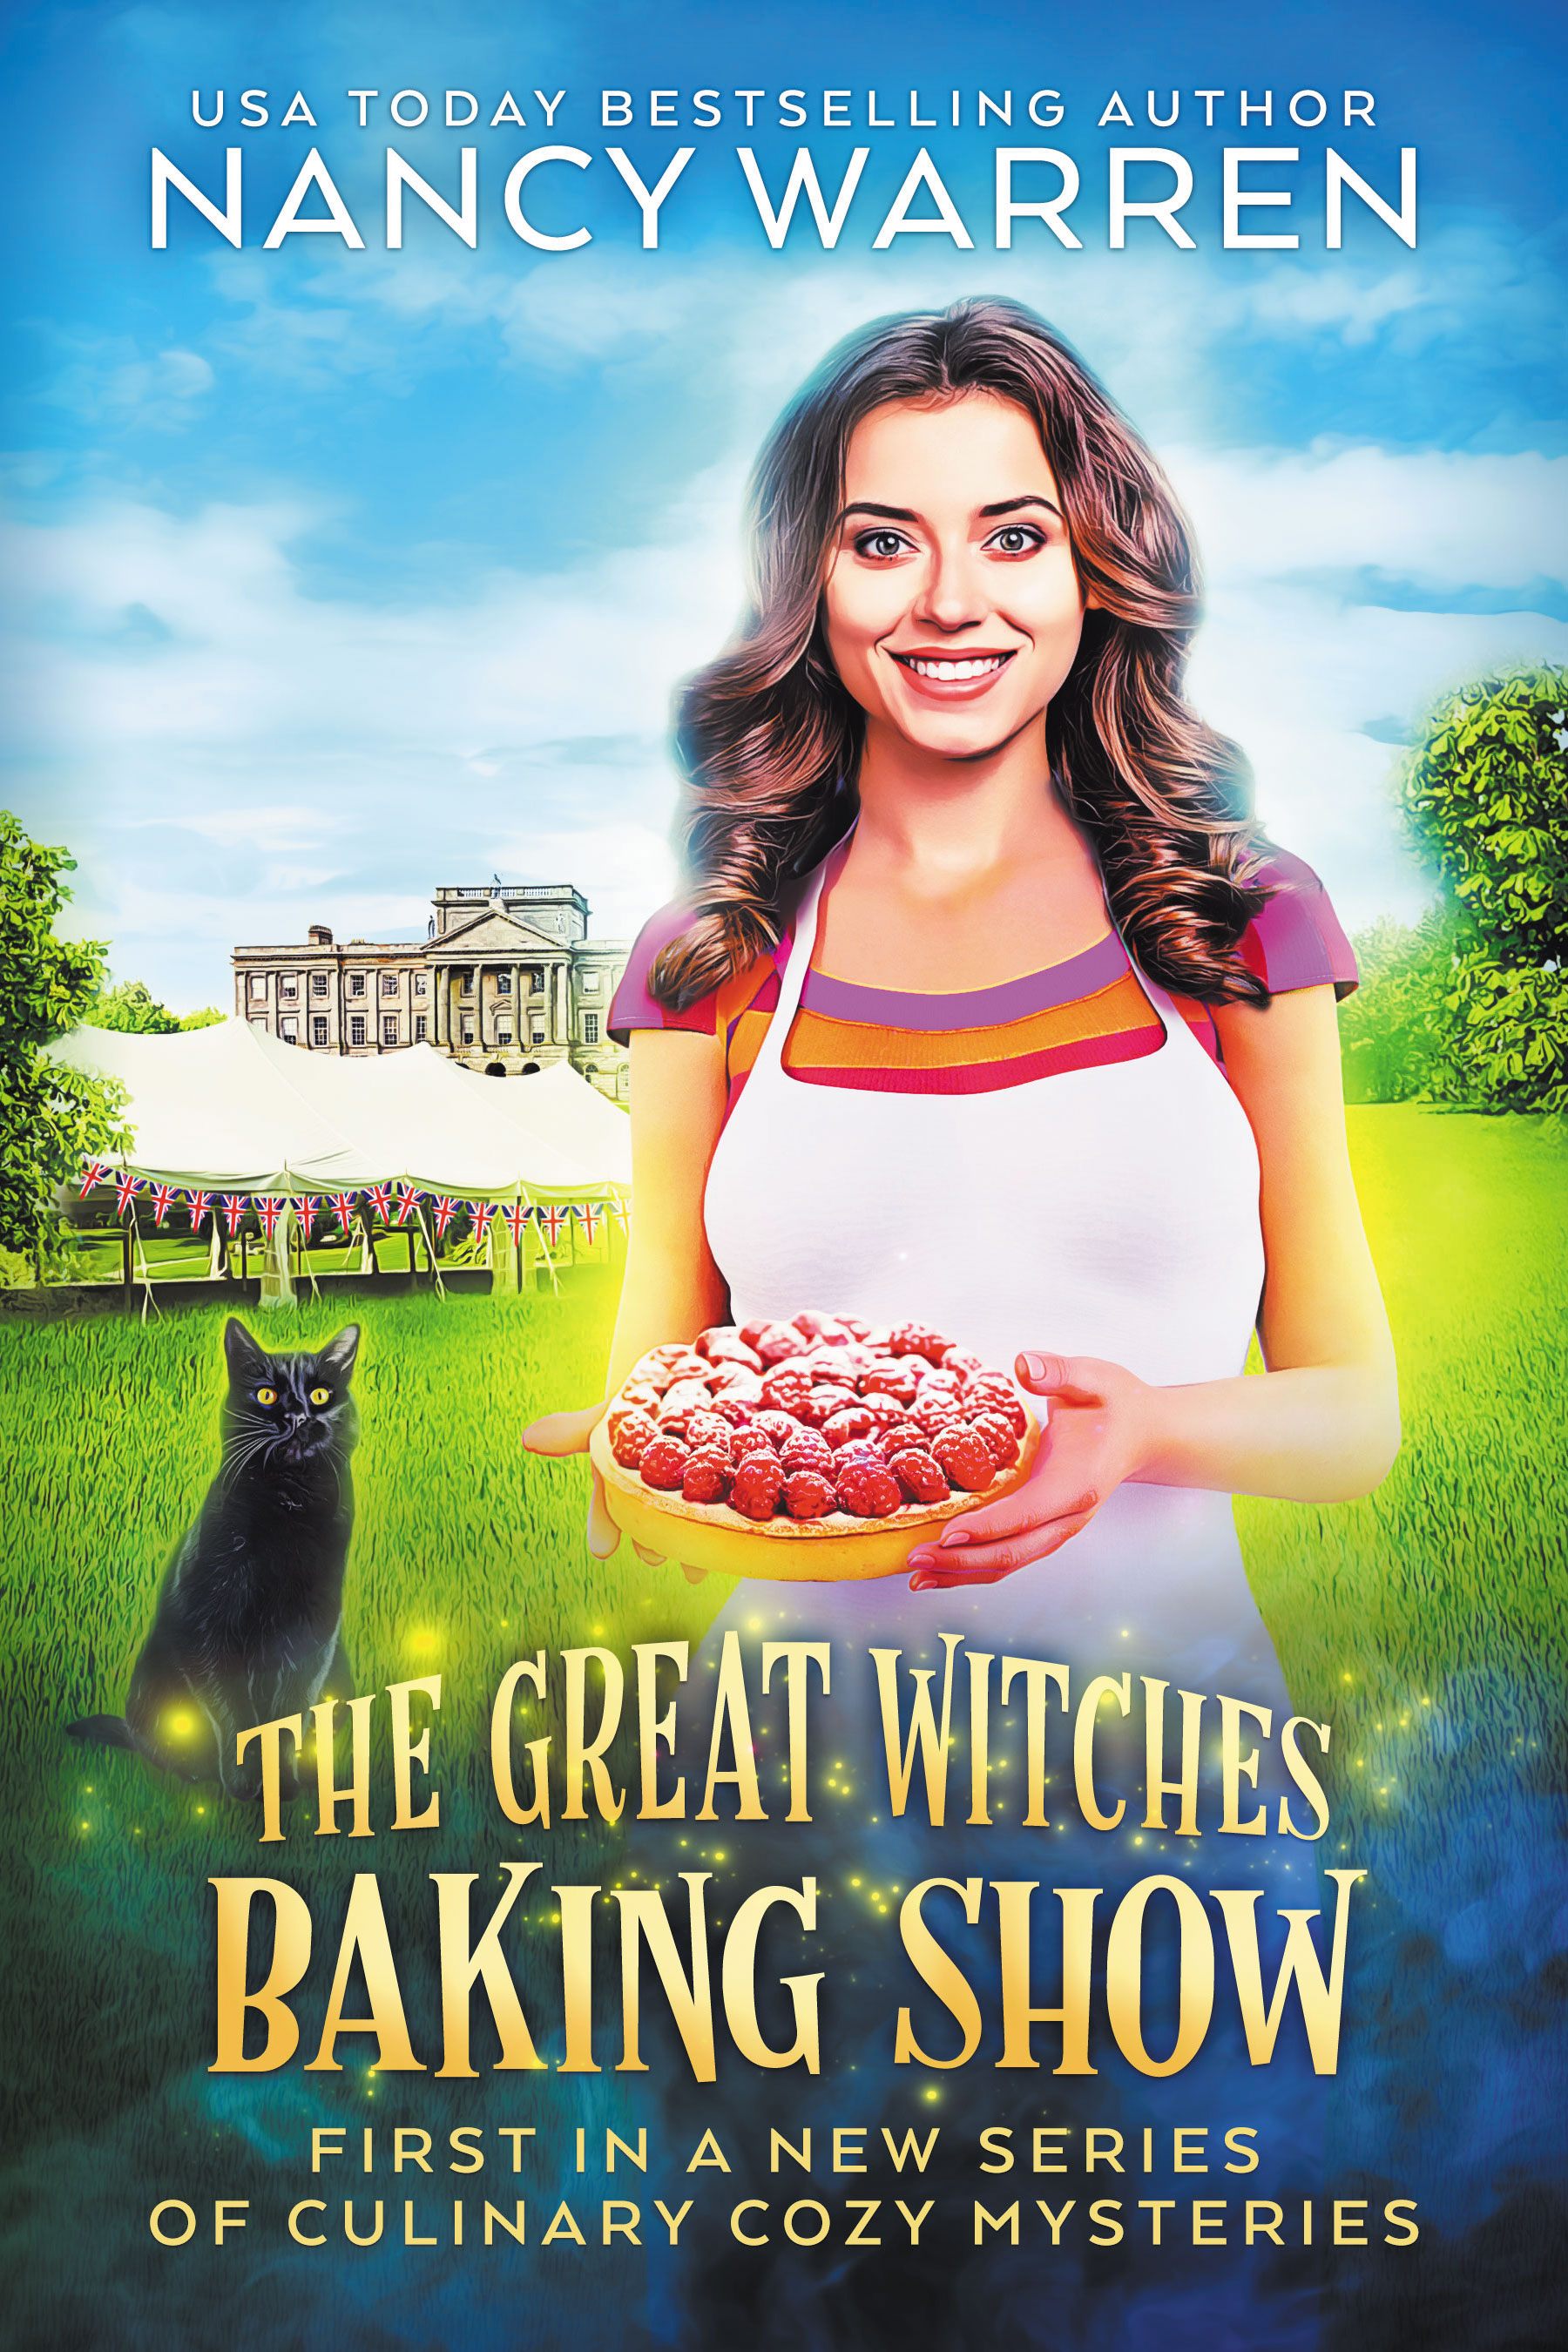 The Great Witches Baking Contest by Nancy Warren